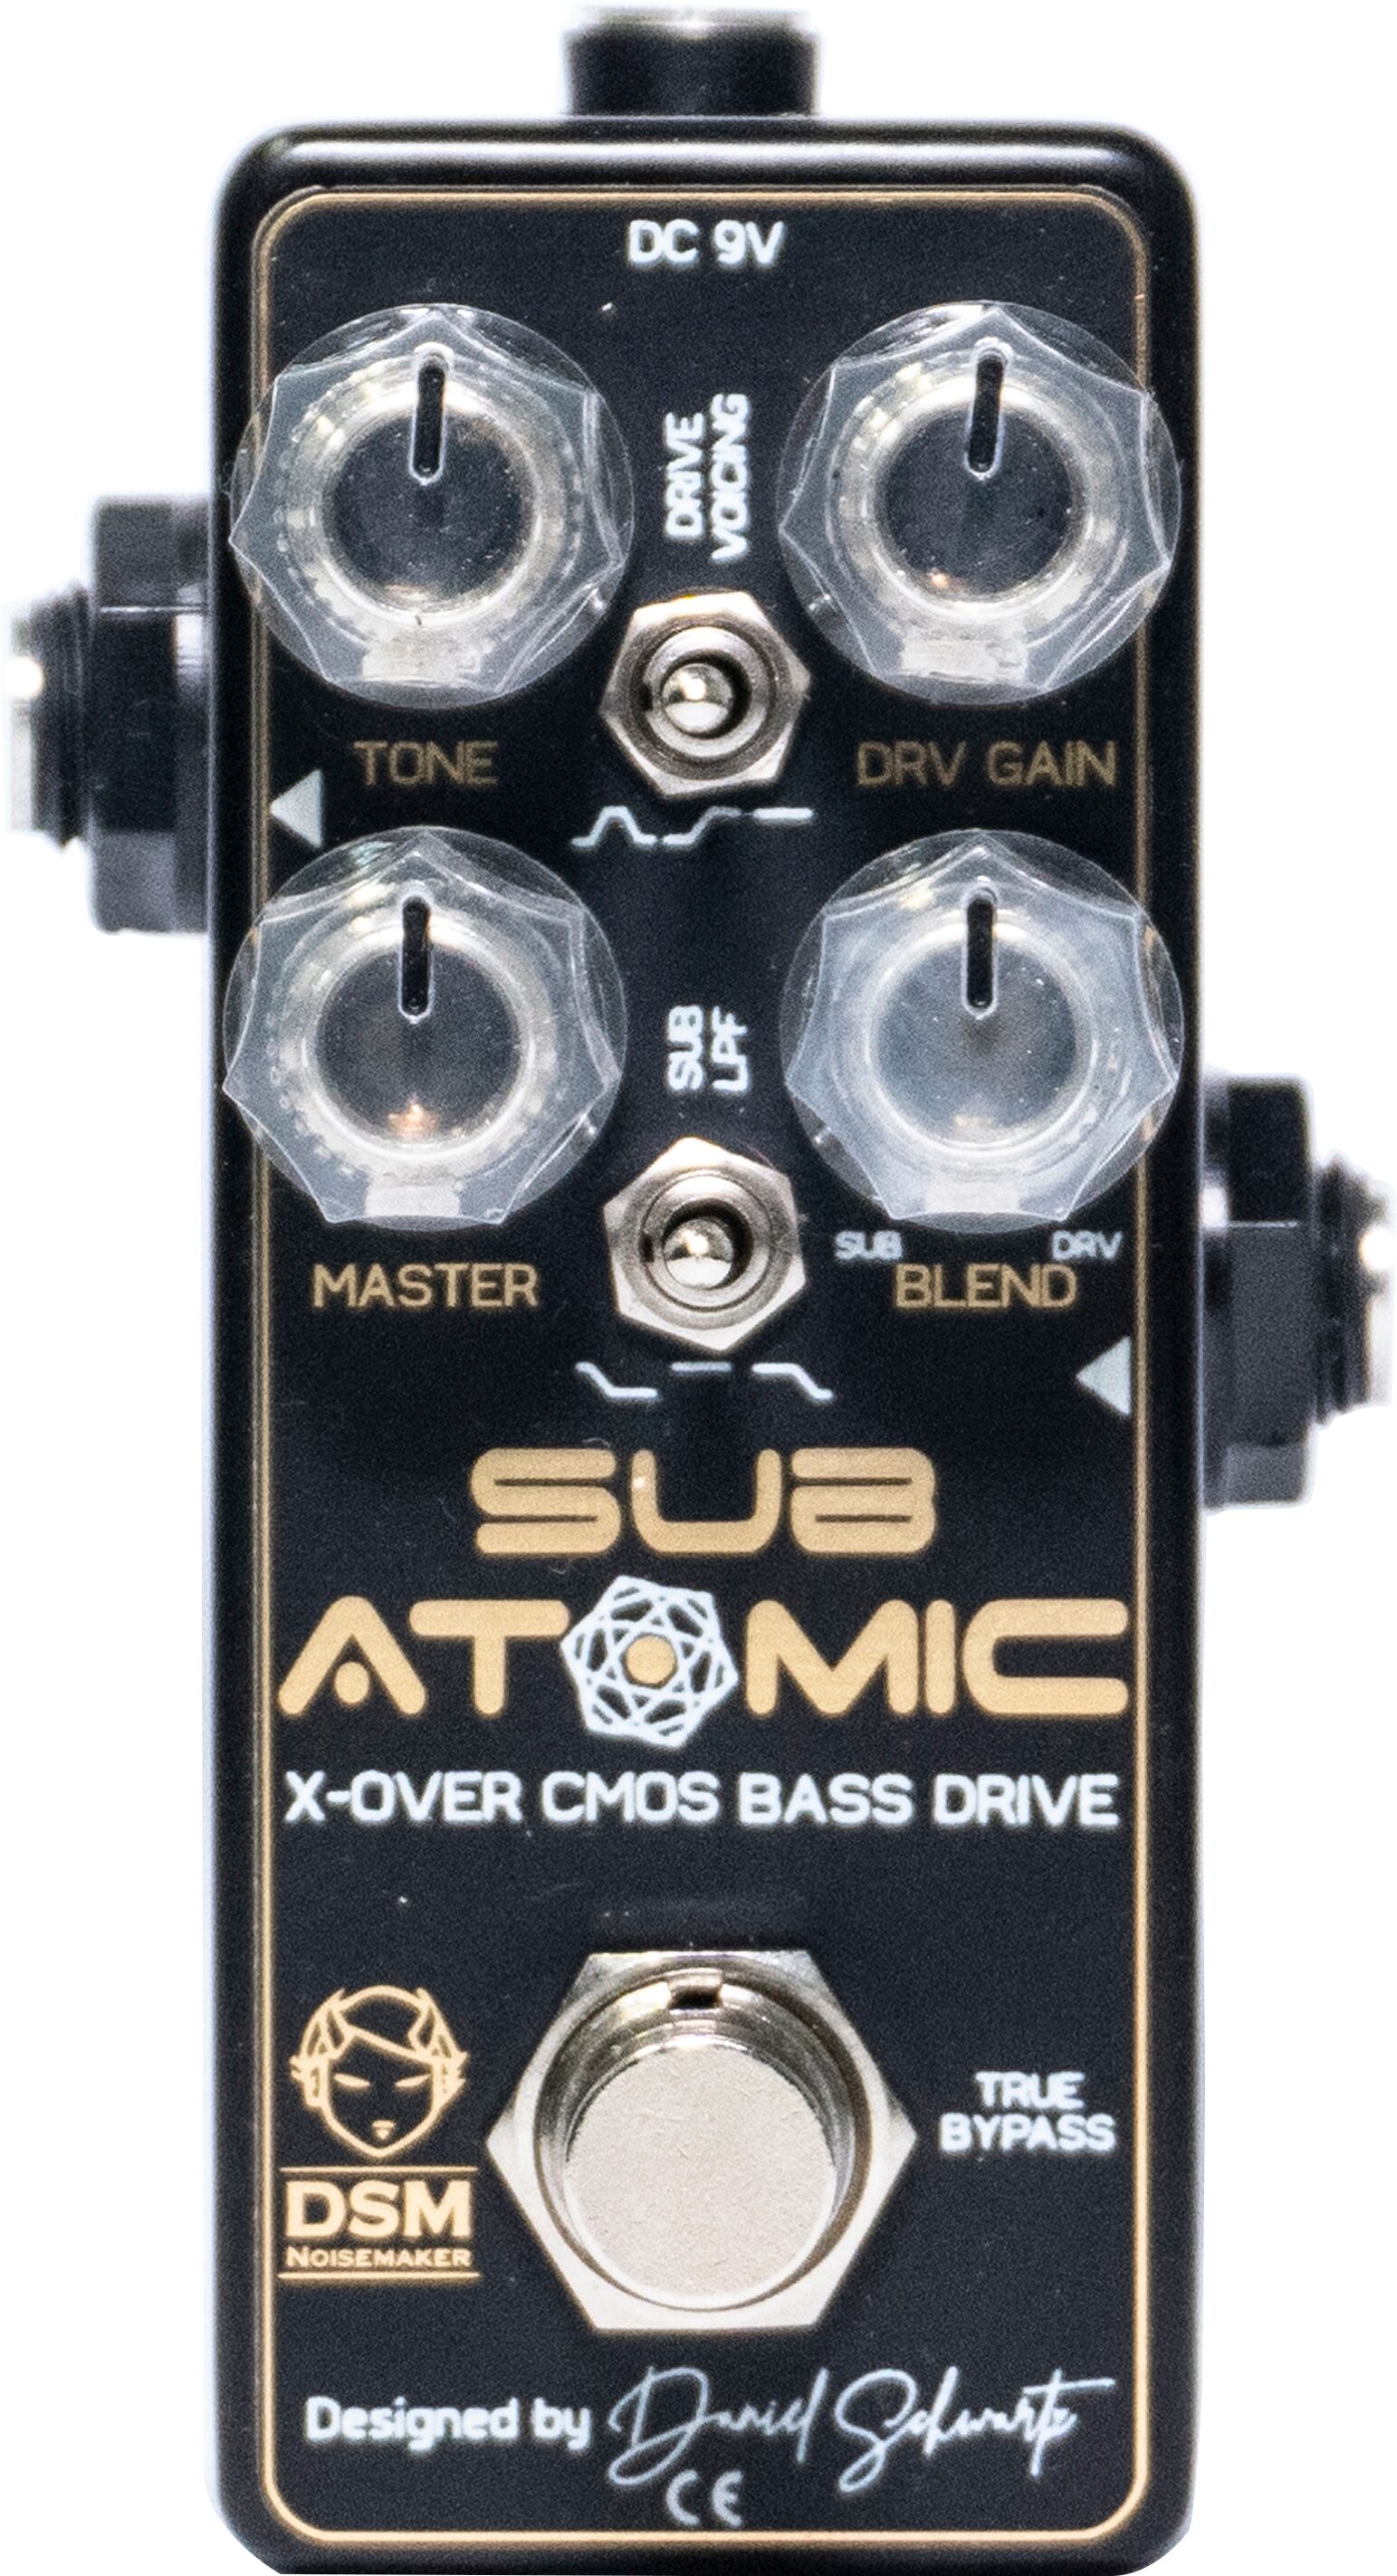 DSM Noisemaker Sub Atomic Bass Distortion and OD Pedal | zZounds